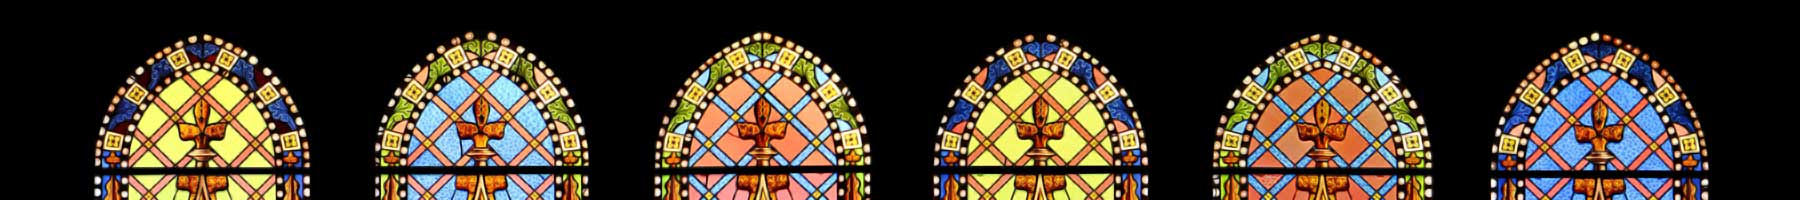 stained glass window arches